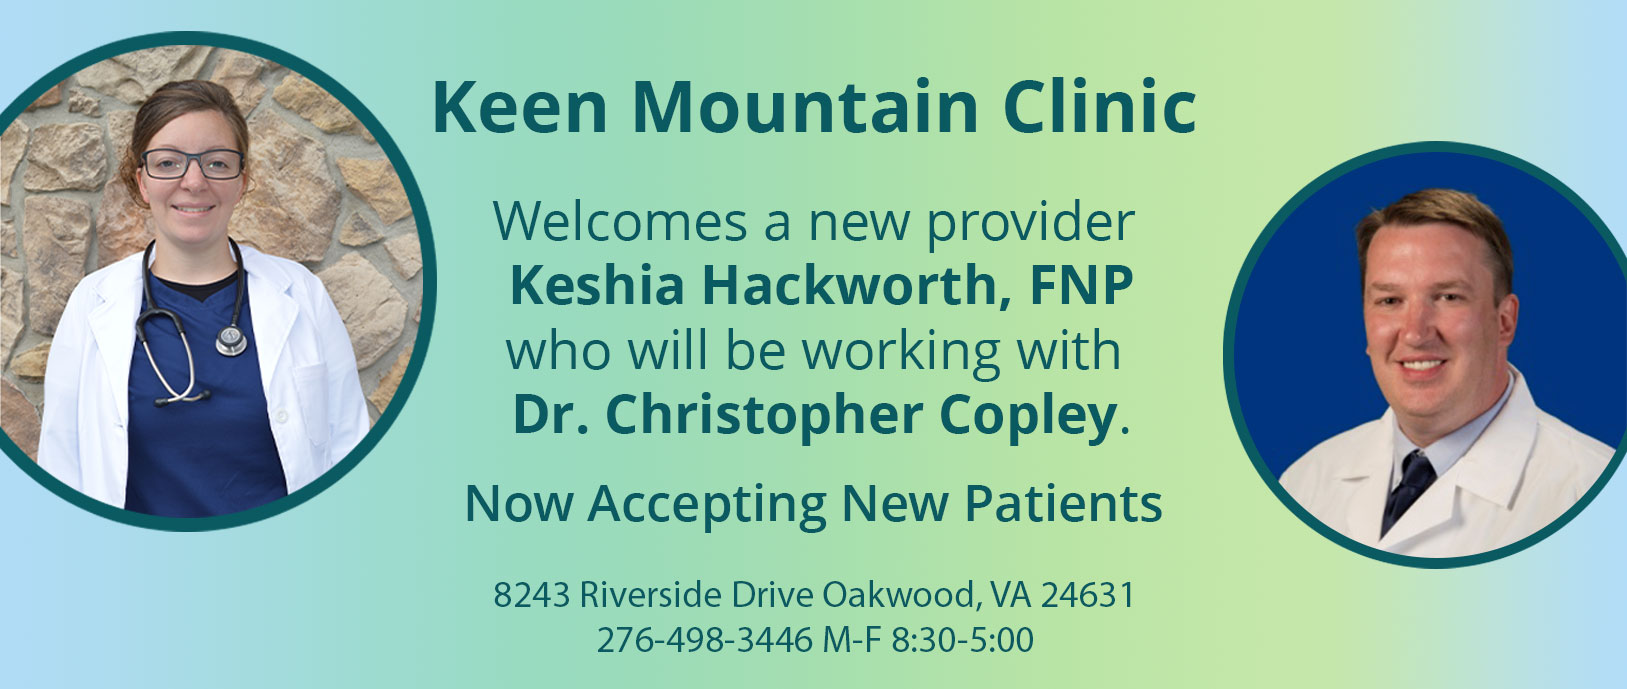 Keen Mountain Clinic

Welcomes a new provider 
Keshia Hackworth, FNP who will be working with Dr. Christopher Copley.

Now Accepting New Patients

8243 Riverside Drive Oakwood, VA 24631
276-498-3446 M-F 8:30-5:00